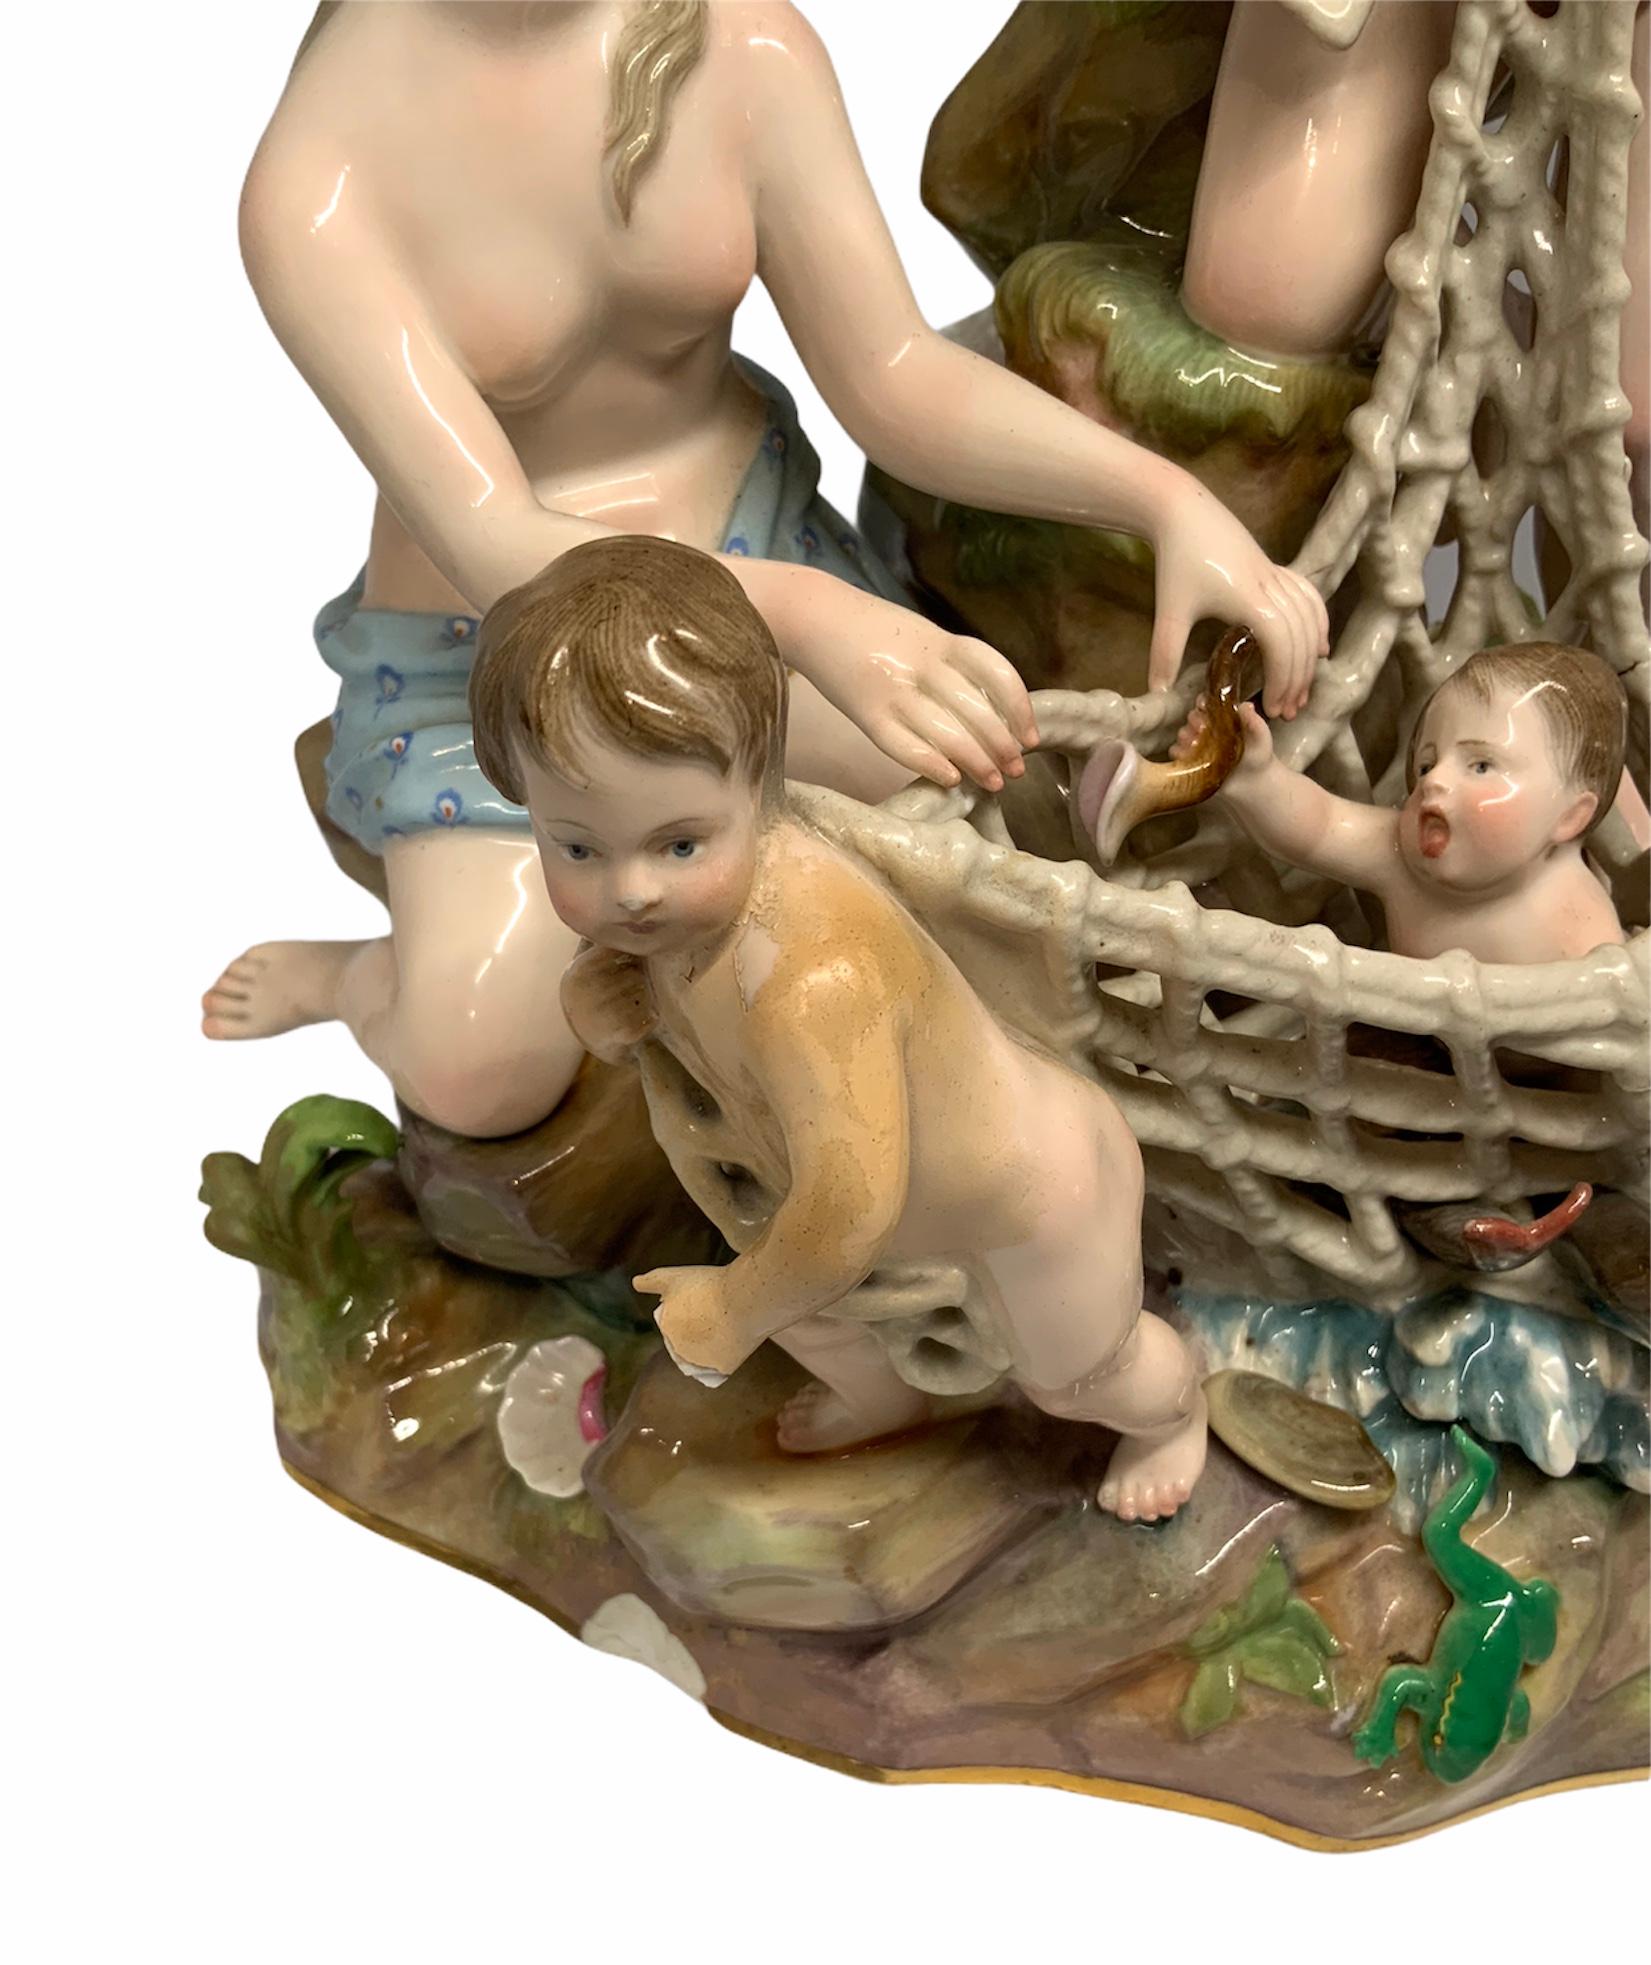 This is a Mythological Meissen group Porcelain figurines depicting two semi nudes nymphs and a nude child holding a fishing net that catches a baby, some fishes and a frog that is escaping from it. They are over a large rock base and some water are